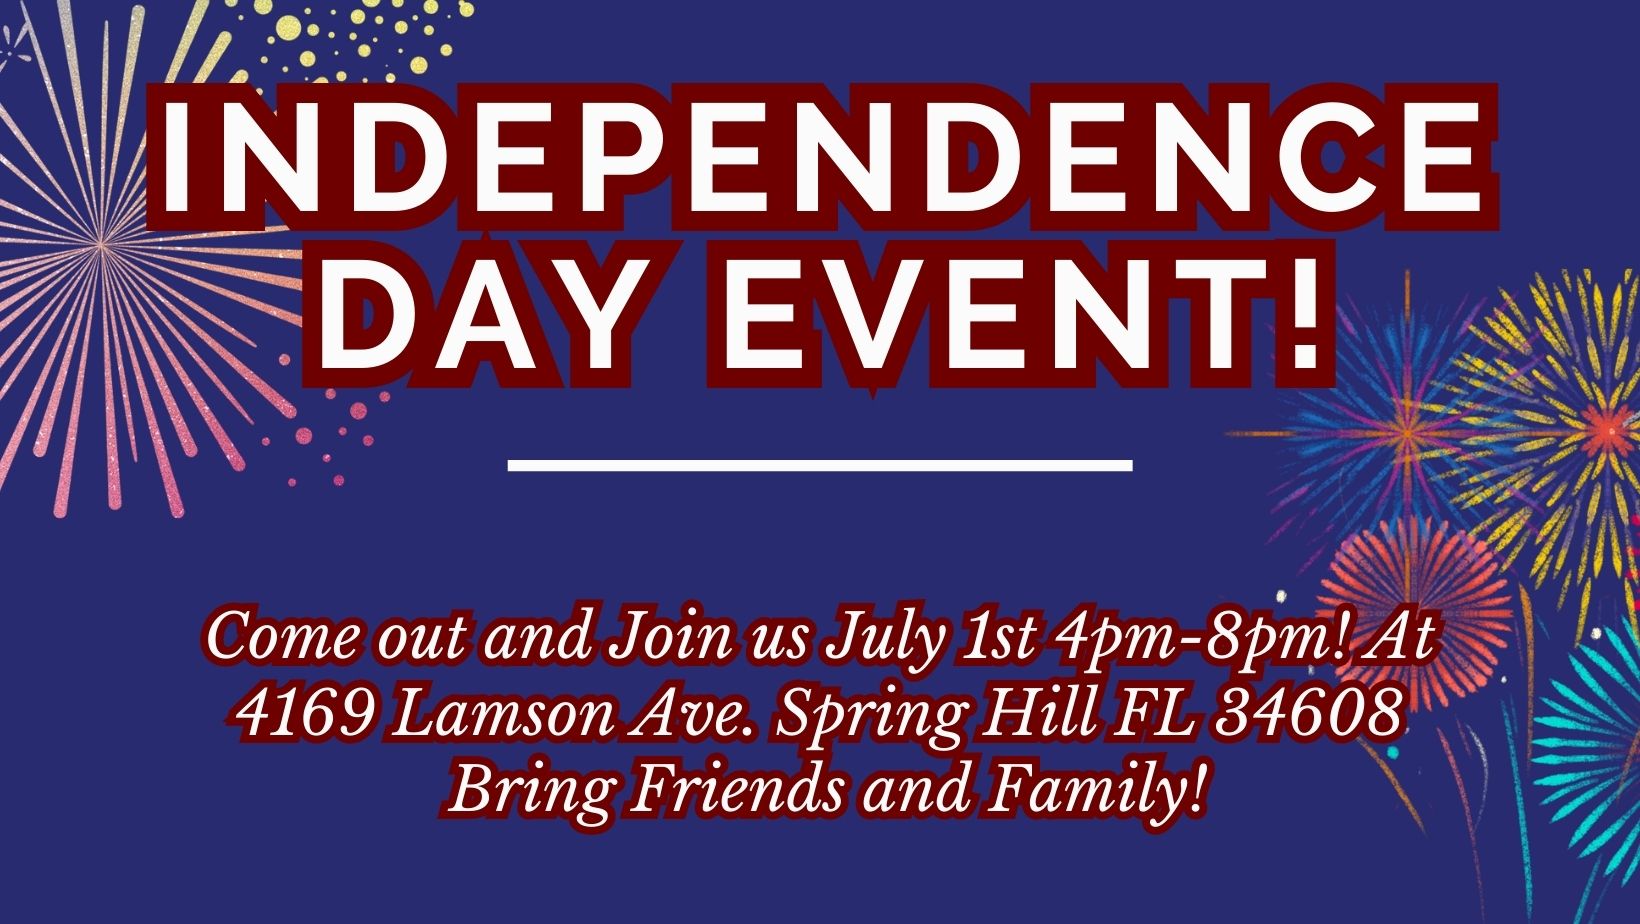 Independance Day Event!